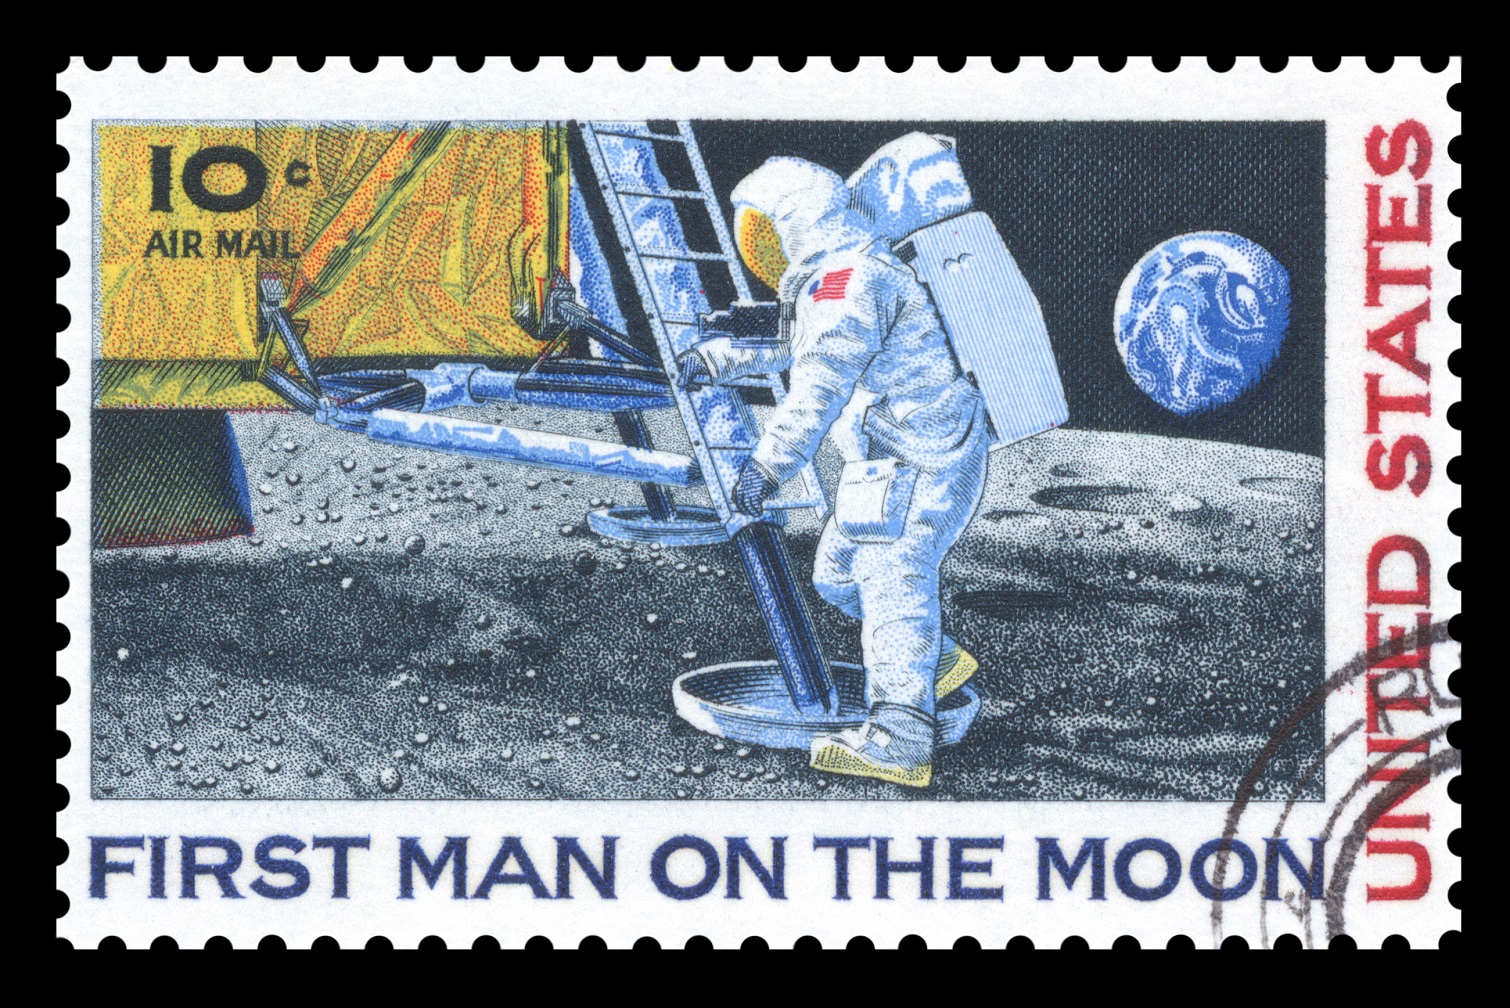 A US postage stamp commemorating the first man on the moon